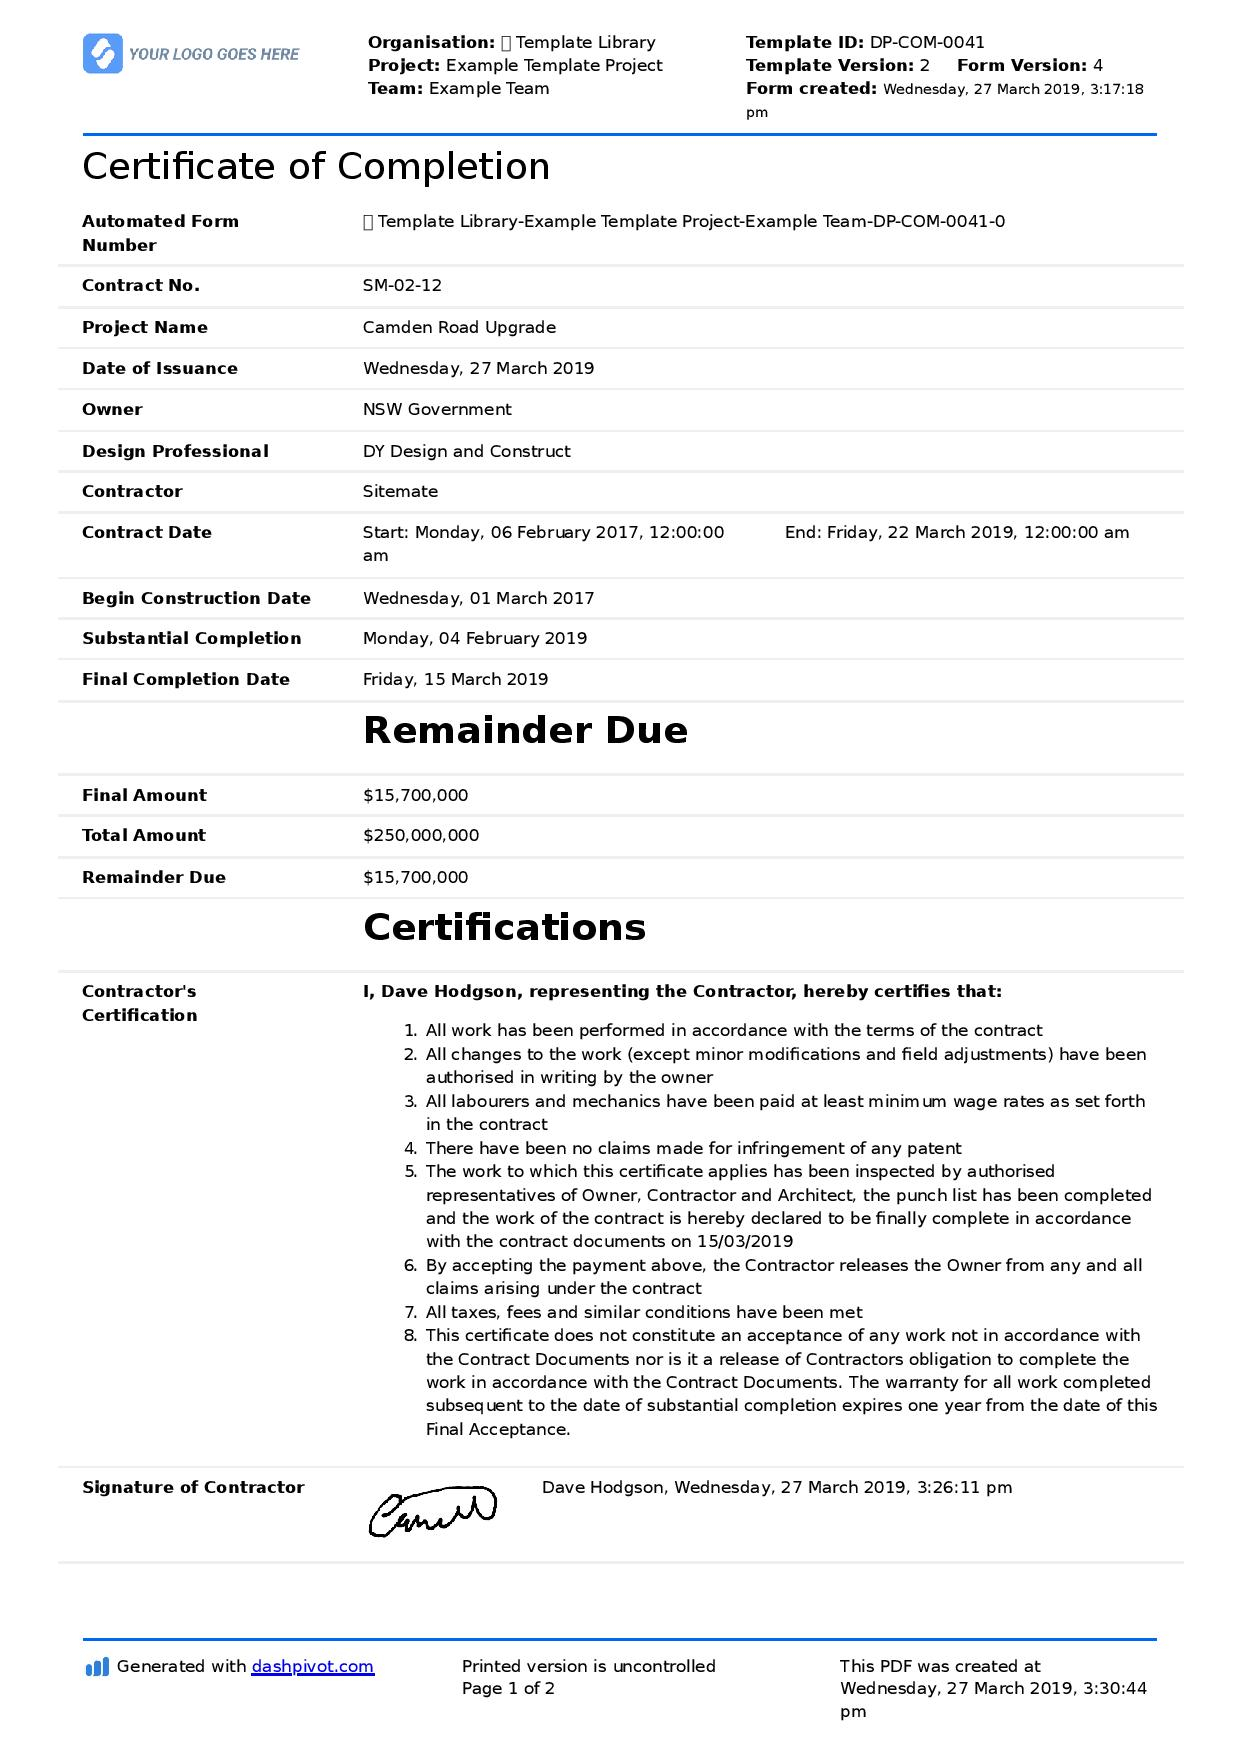 Certificate of Completion for Construction (Free template + sample) Pertaining To Certificate Of Completion Template Construction